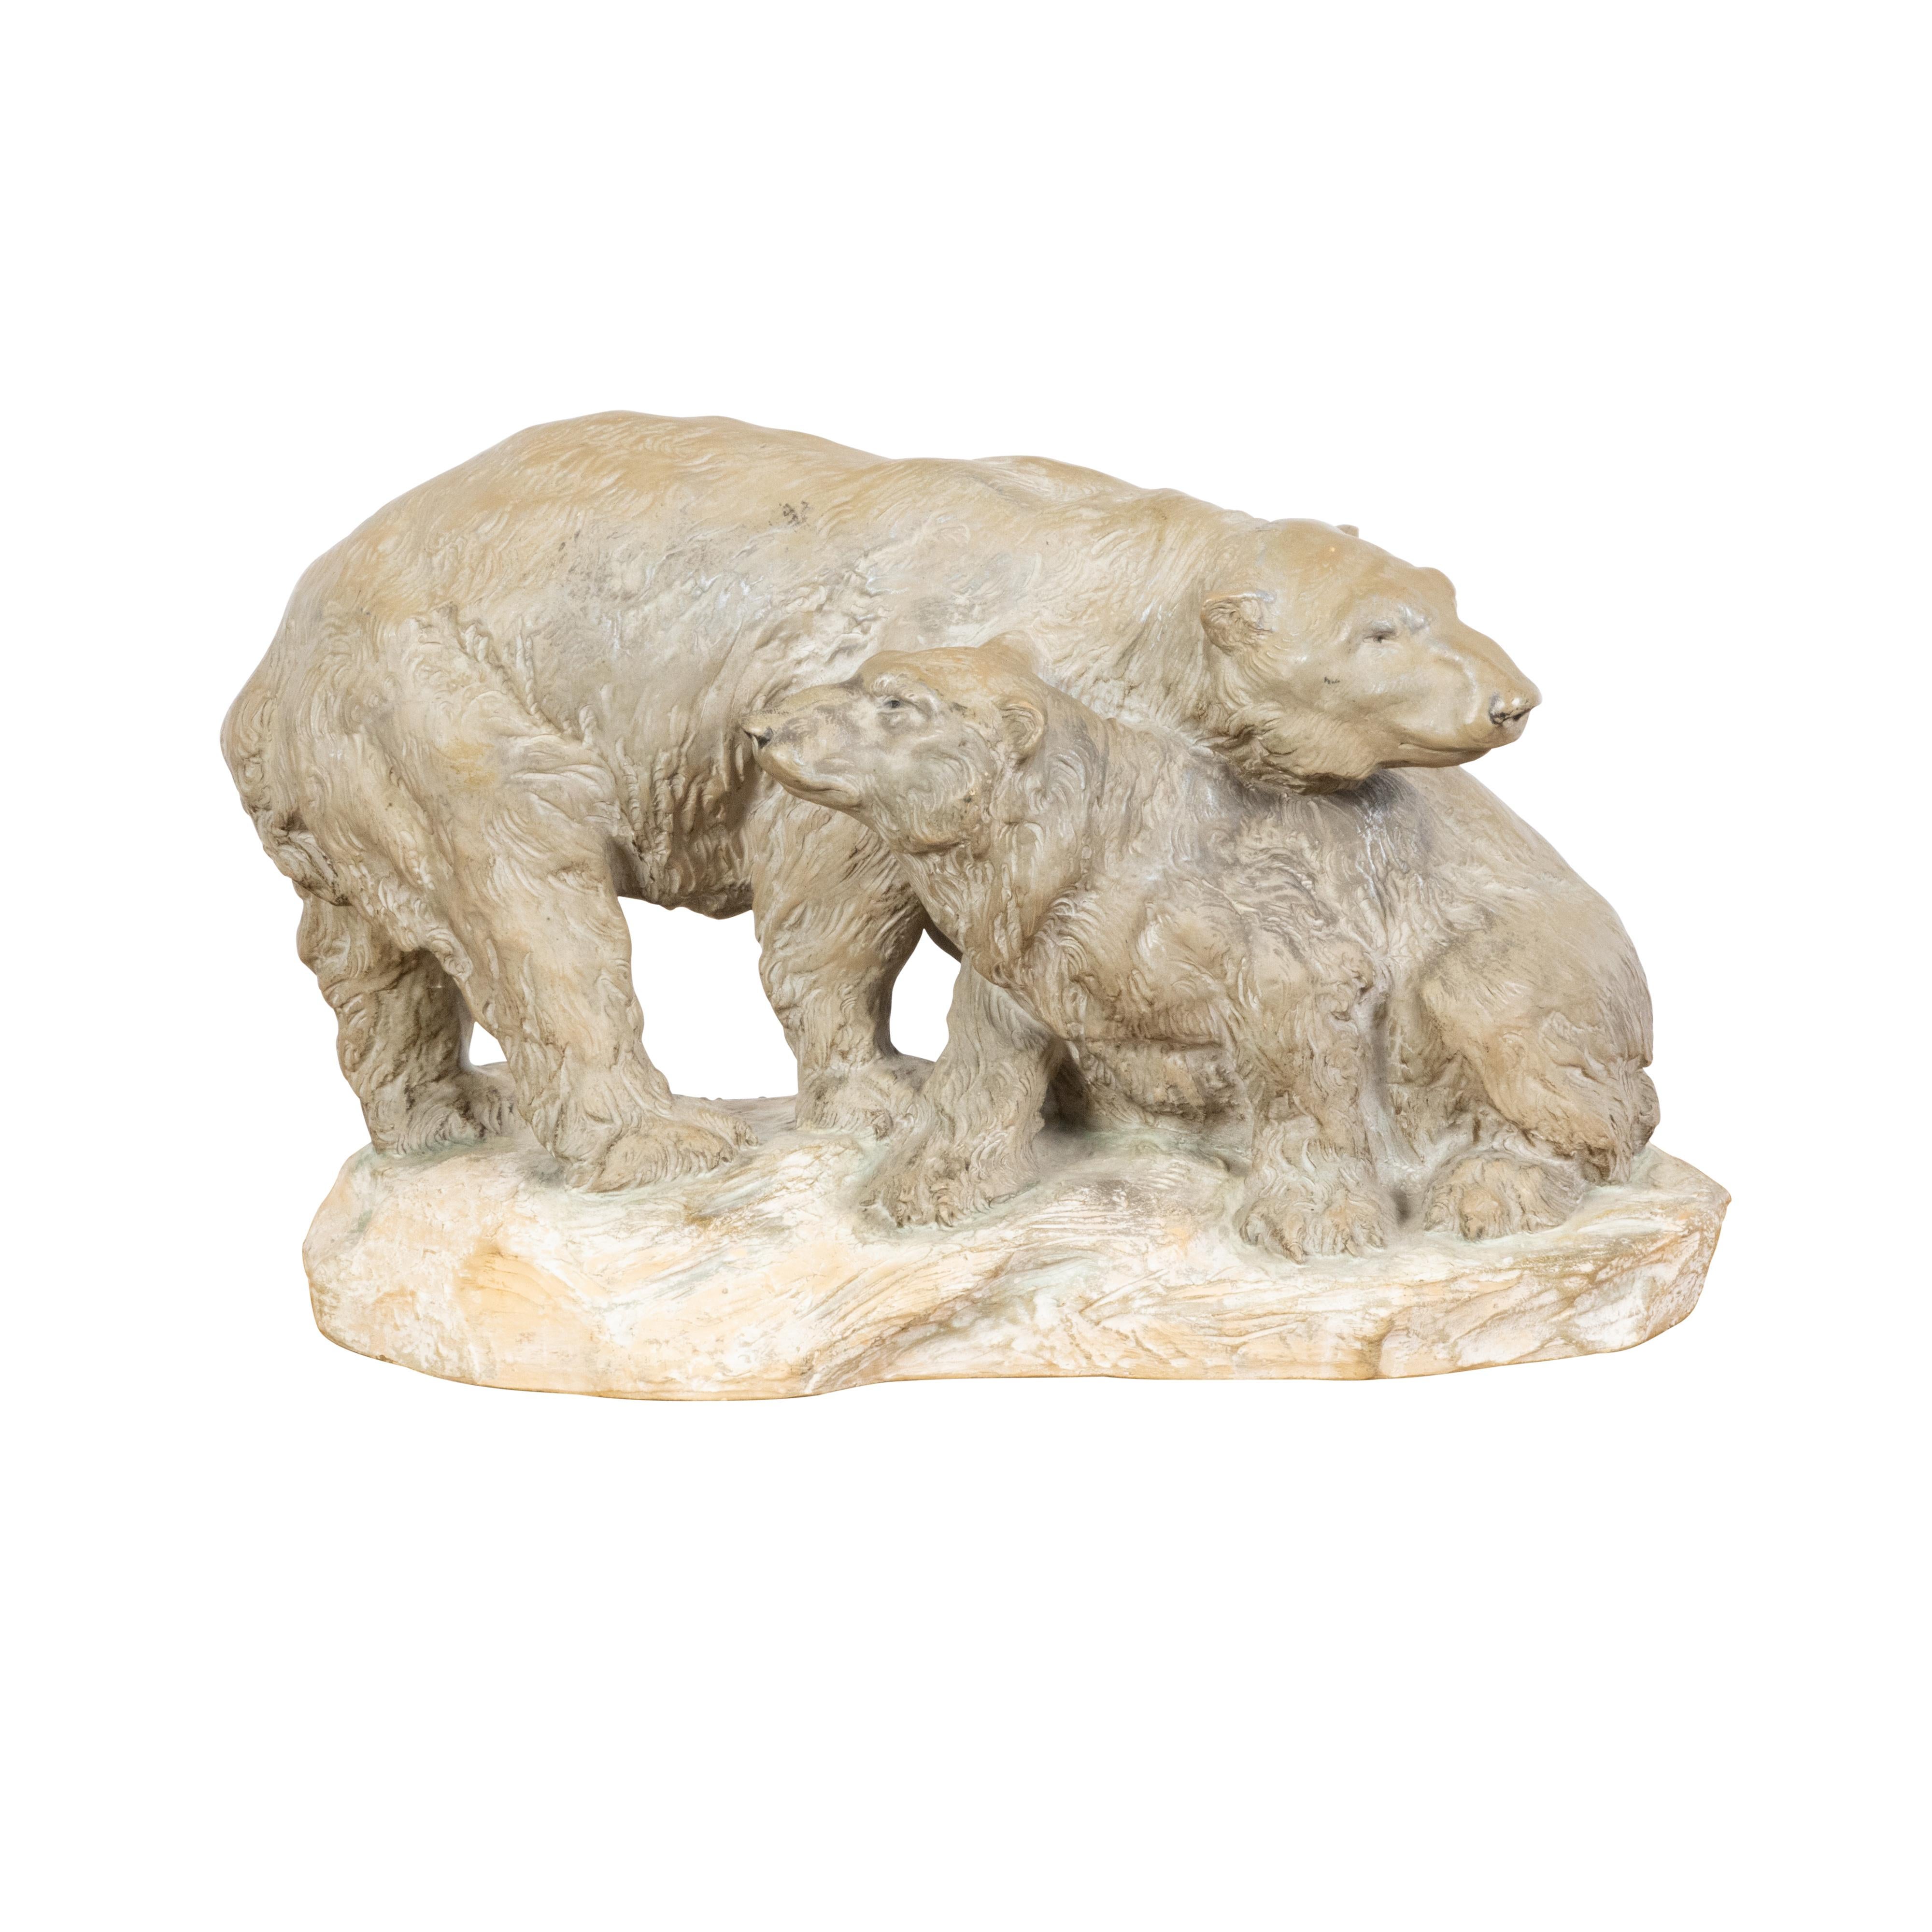 Continental Midcentury Terracotta Sculpture Depicting Two Bears on a Base